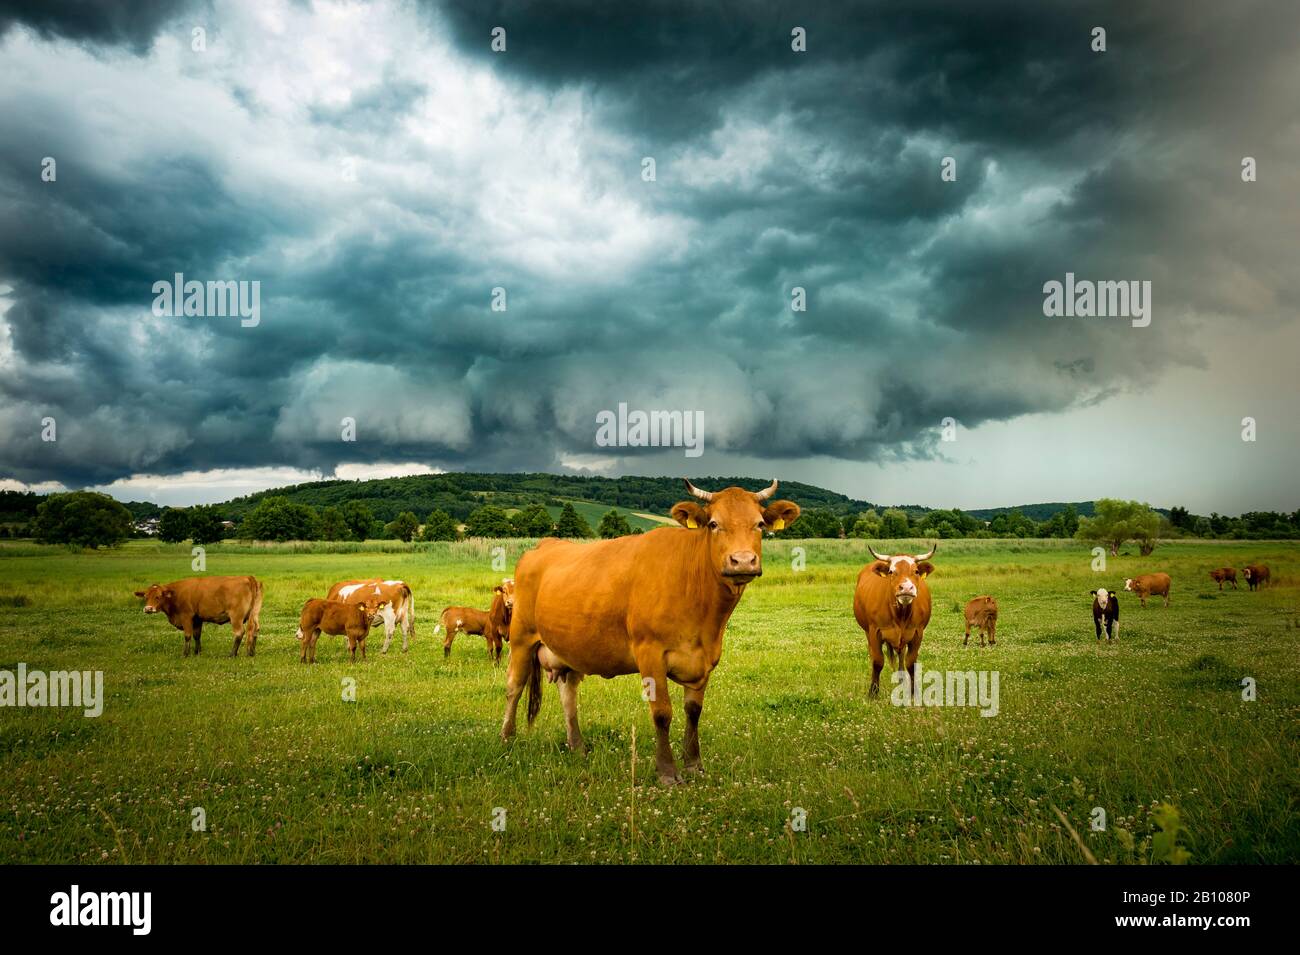 Cows before a strong thunderstorm near Florstadt, Hessen, Germany Stock Photo